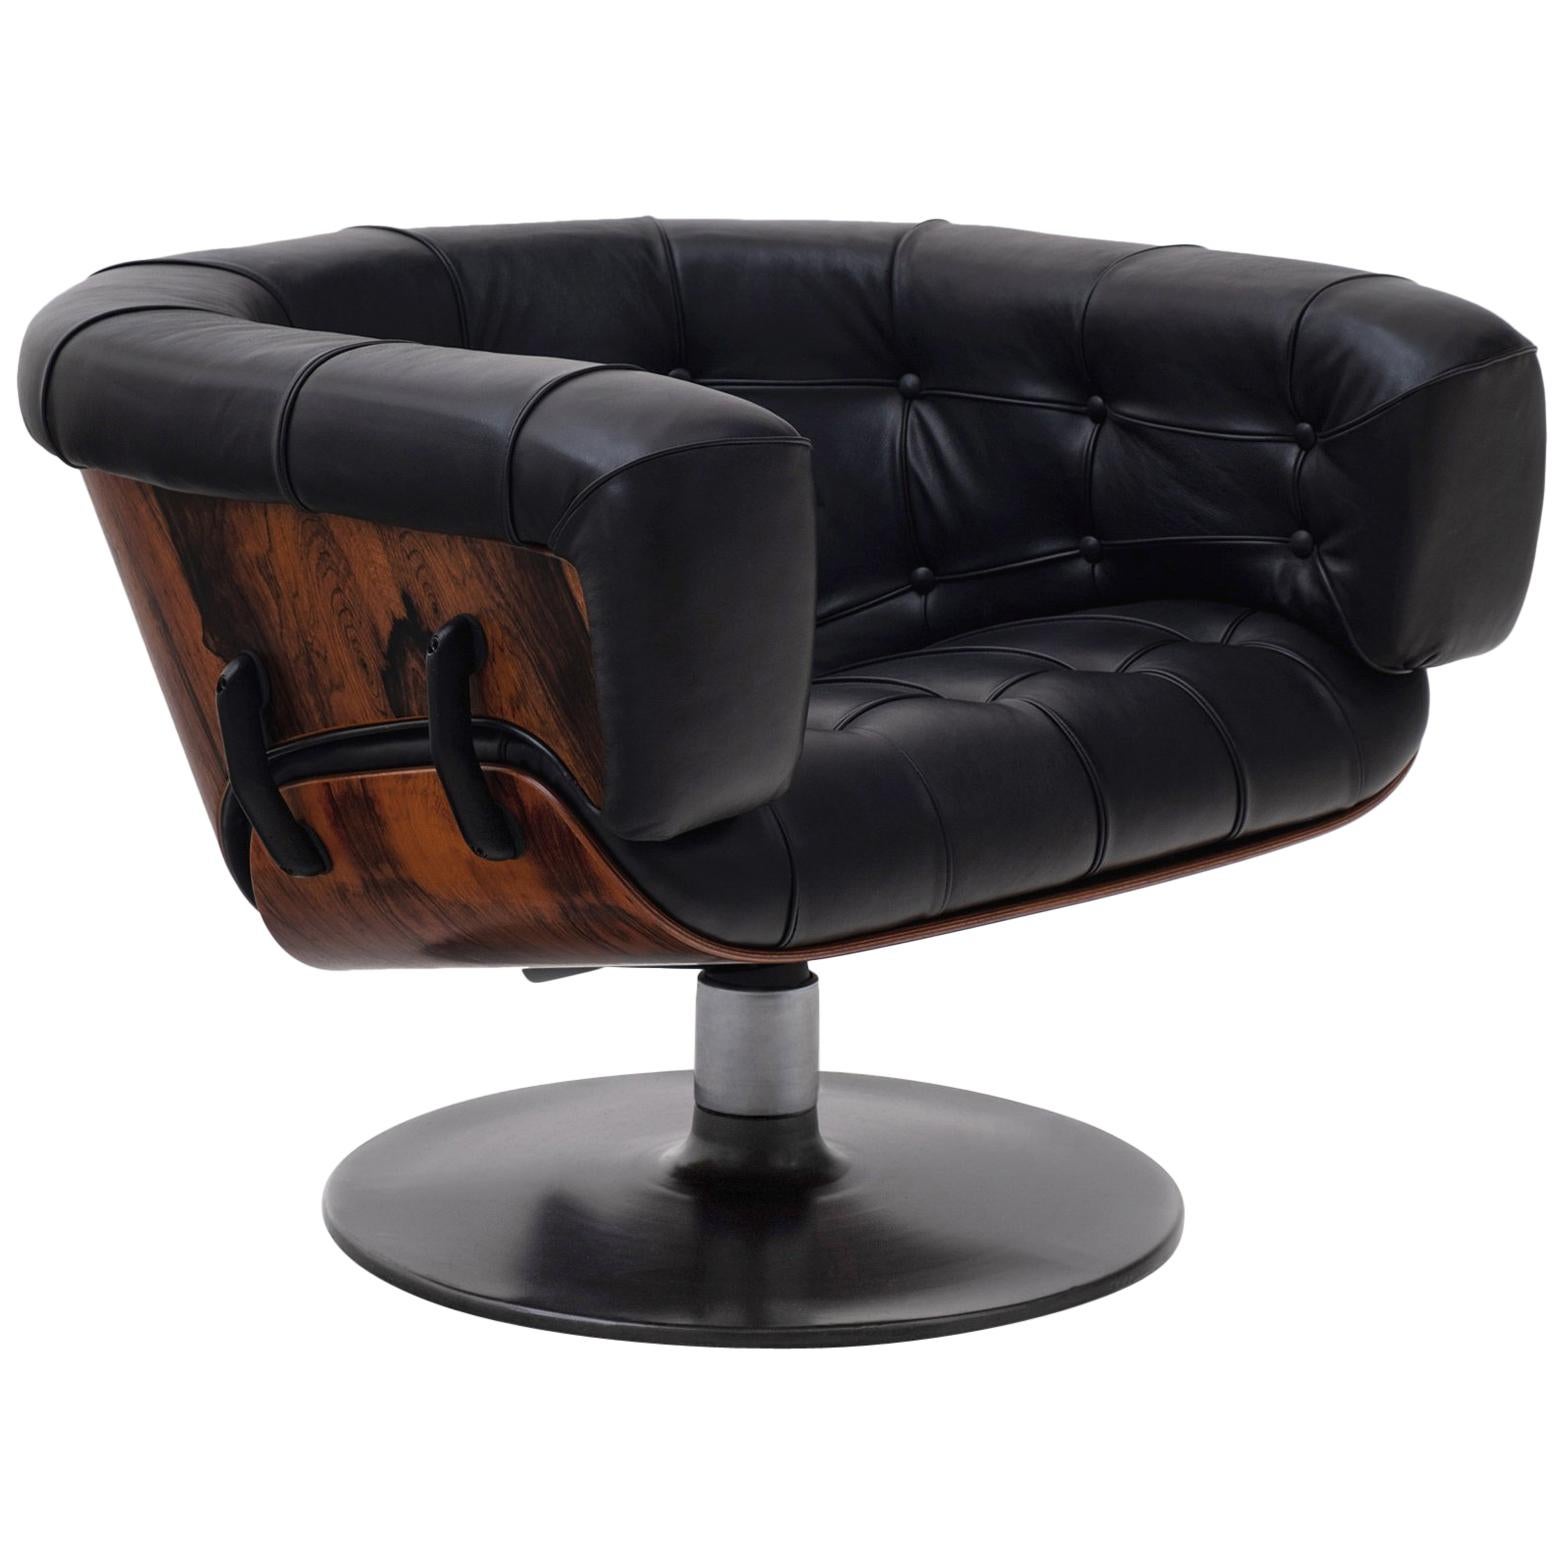 Mid-Century Modern Rosewood and Black Leather Lounge Chair by Martin Grierson